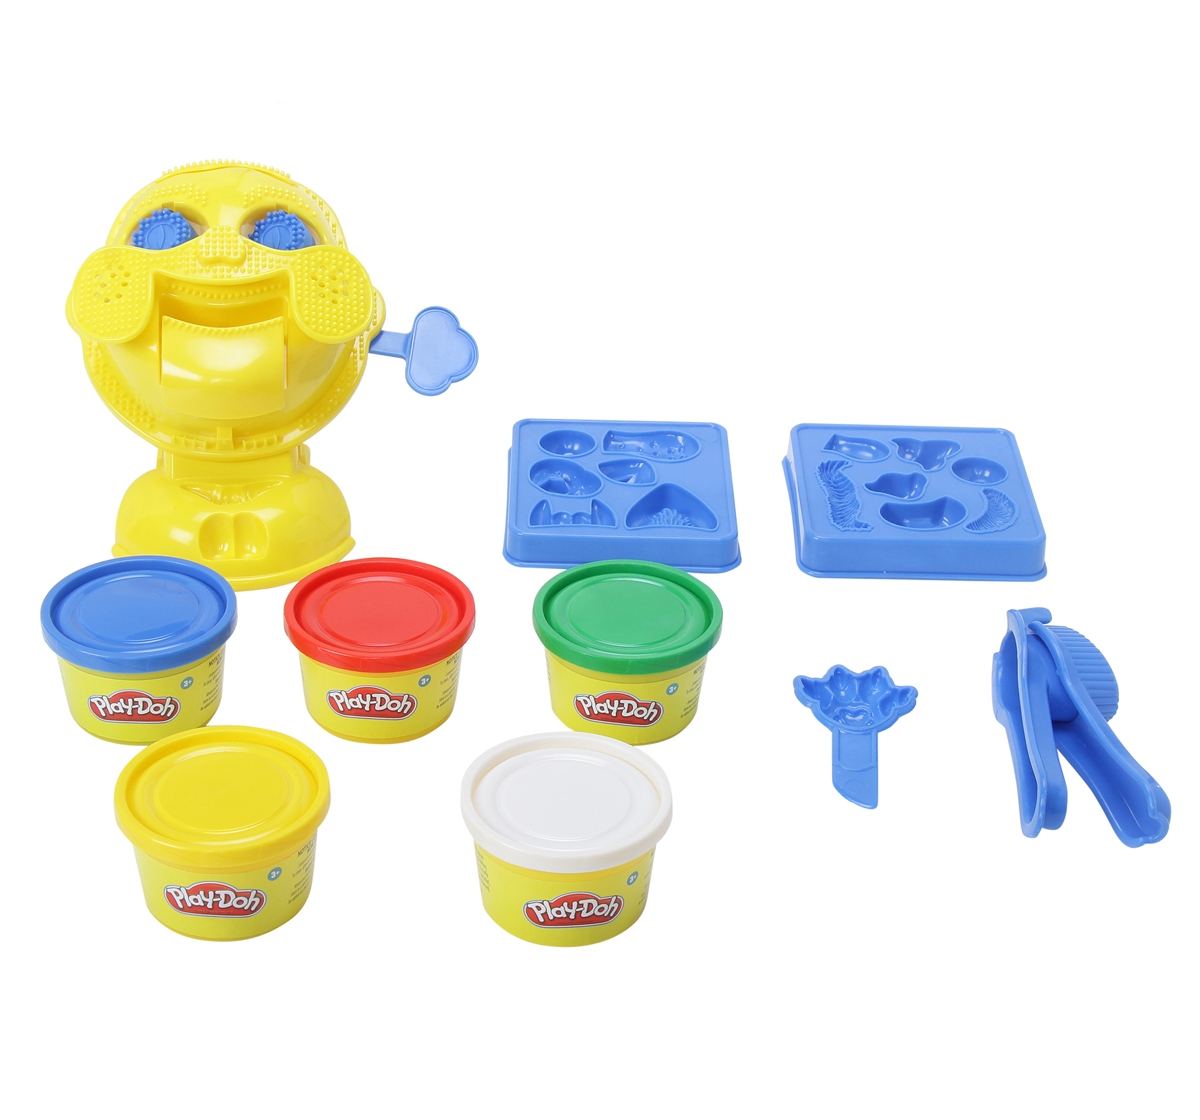 Play-Doh | Play Doh Play Faces Activity Toy for Kids 3Y+, Multicolour 1